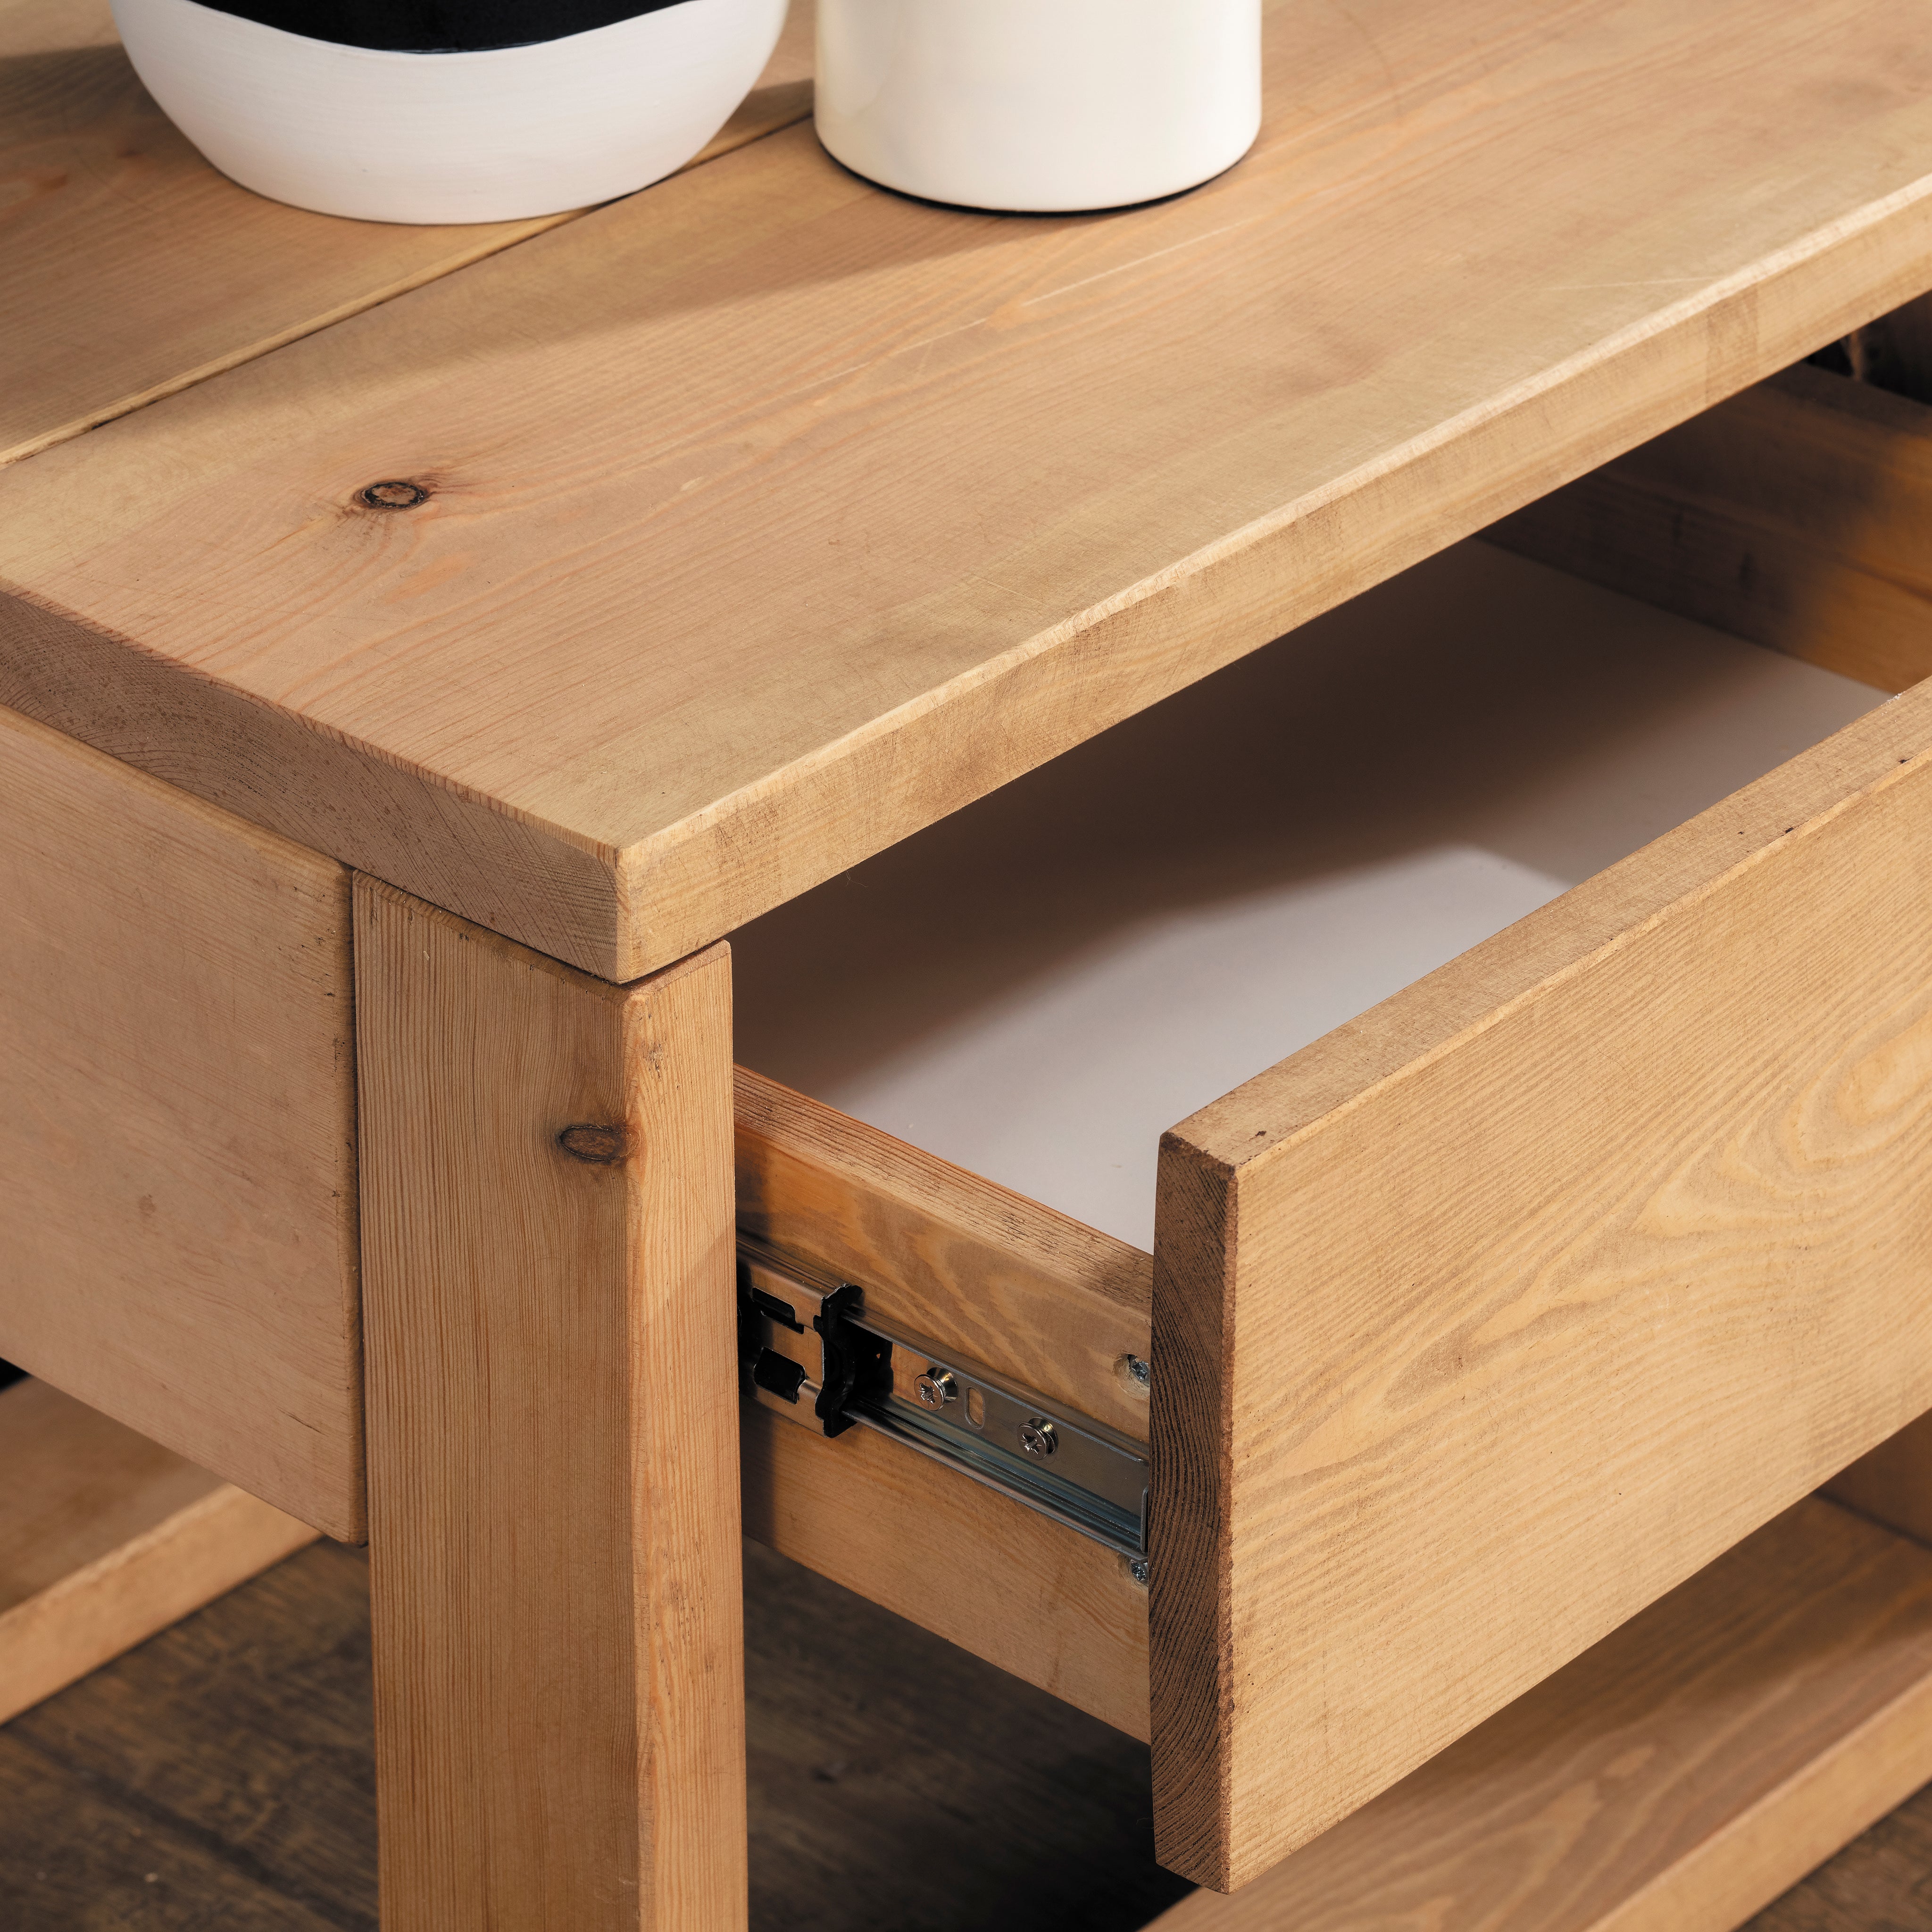 Sandyford Bedside Table With Drawer - Outlet - Save 15%